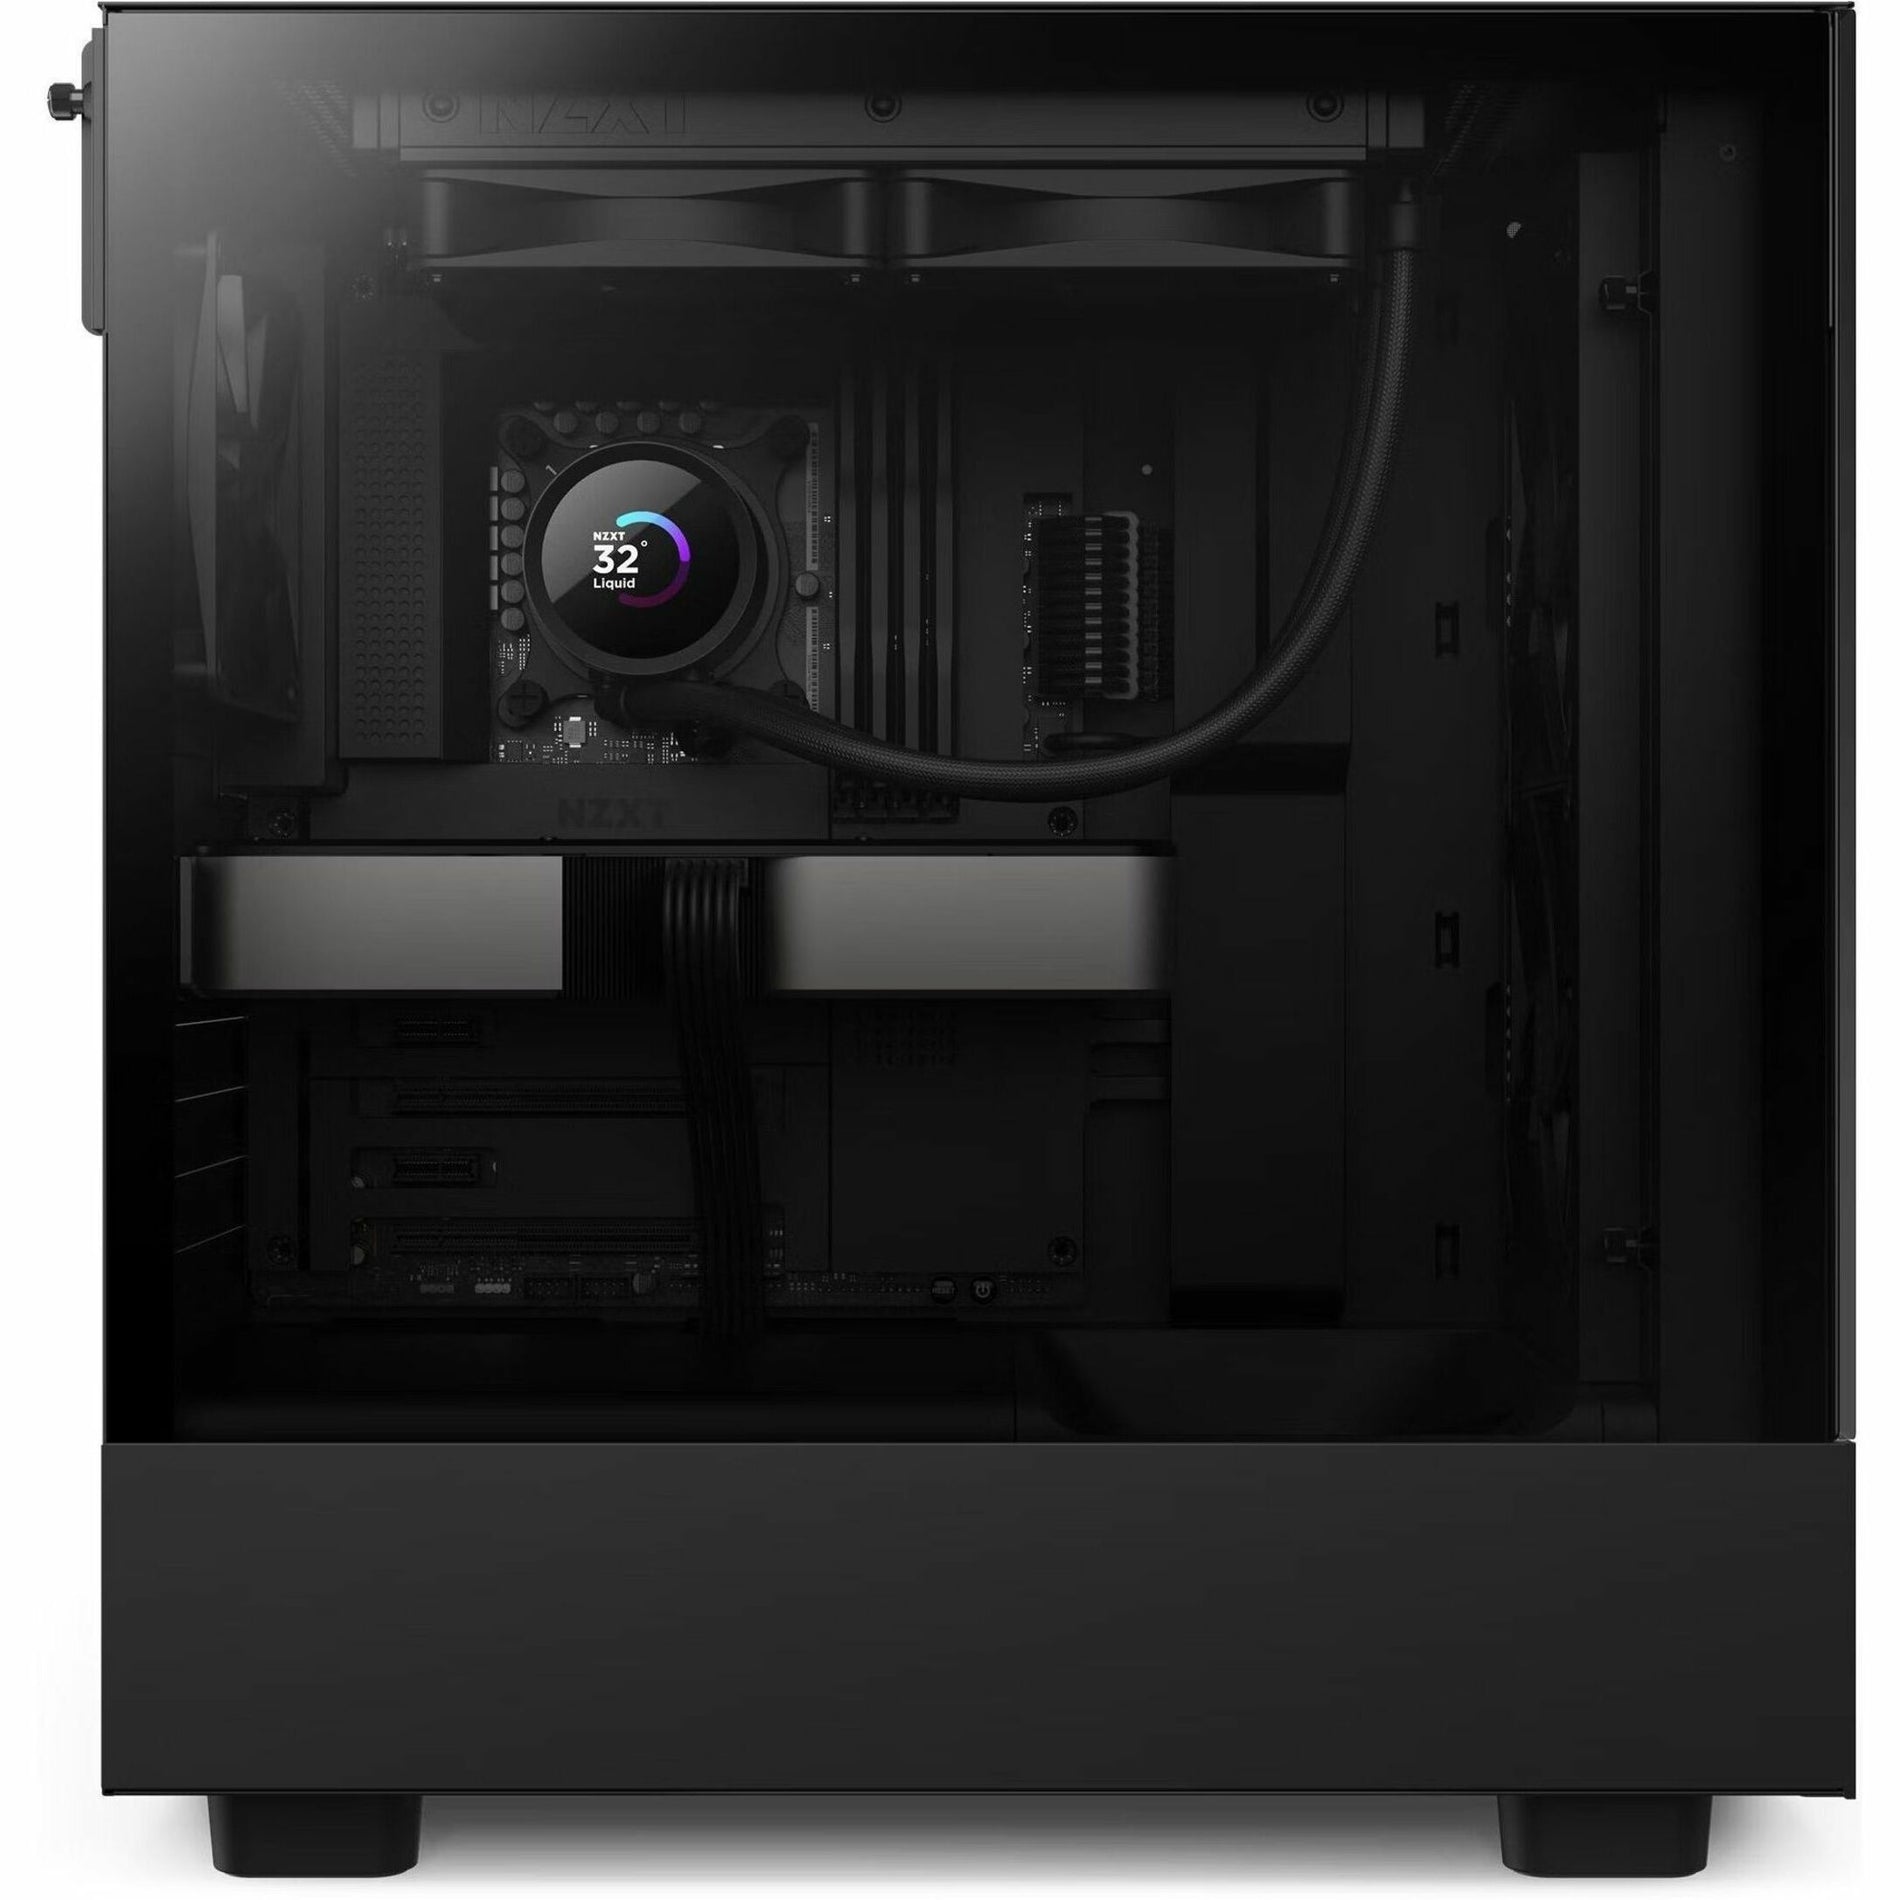 NZXT RL-KN240-B1 Kraken 240 240mm AIO Liquid Cooler with LCD Display, High Performance Cooling Solution